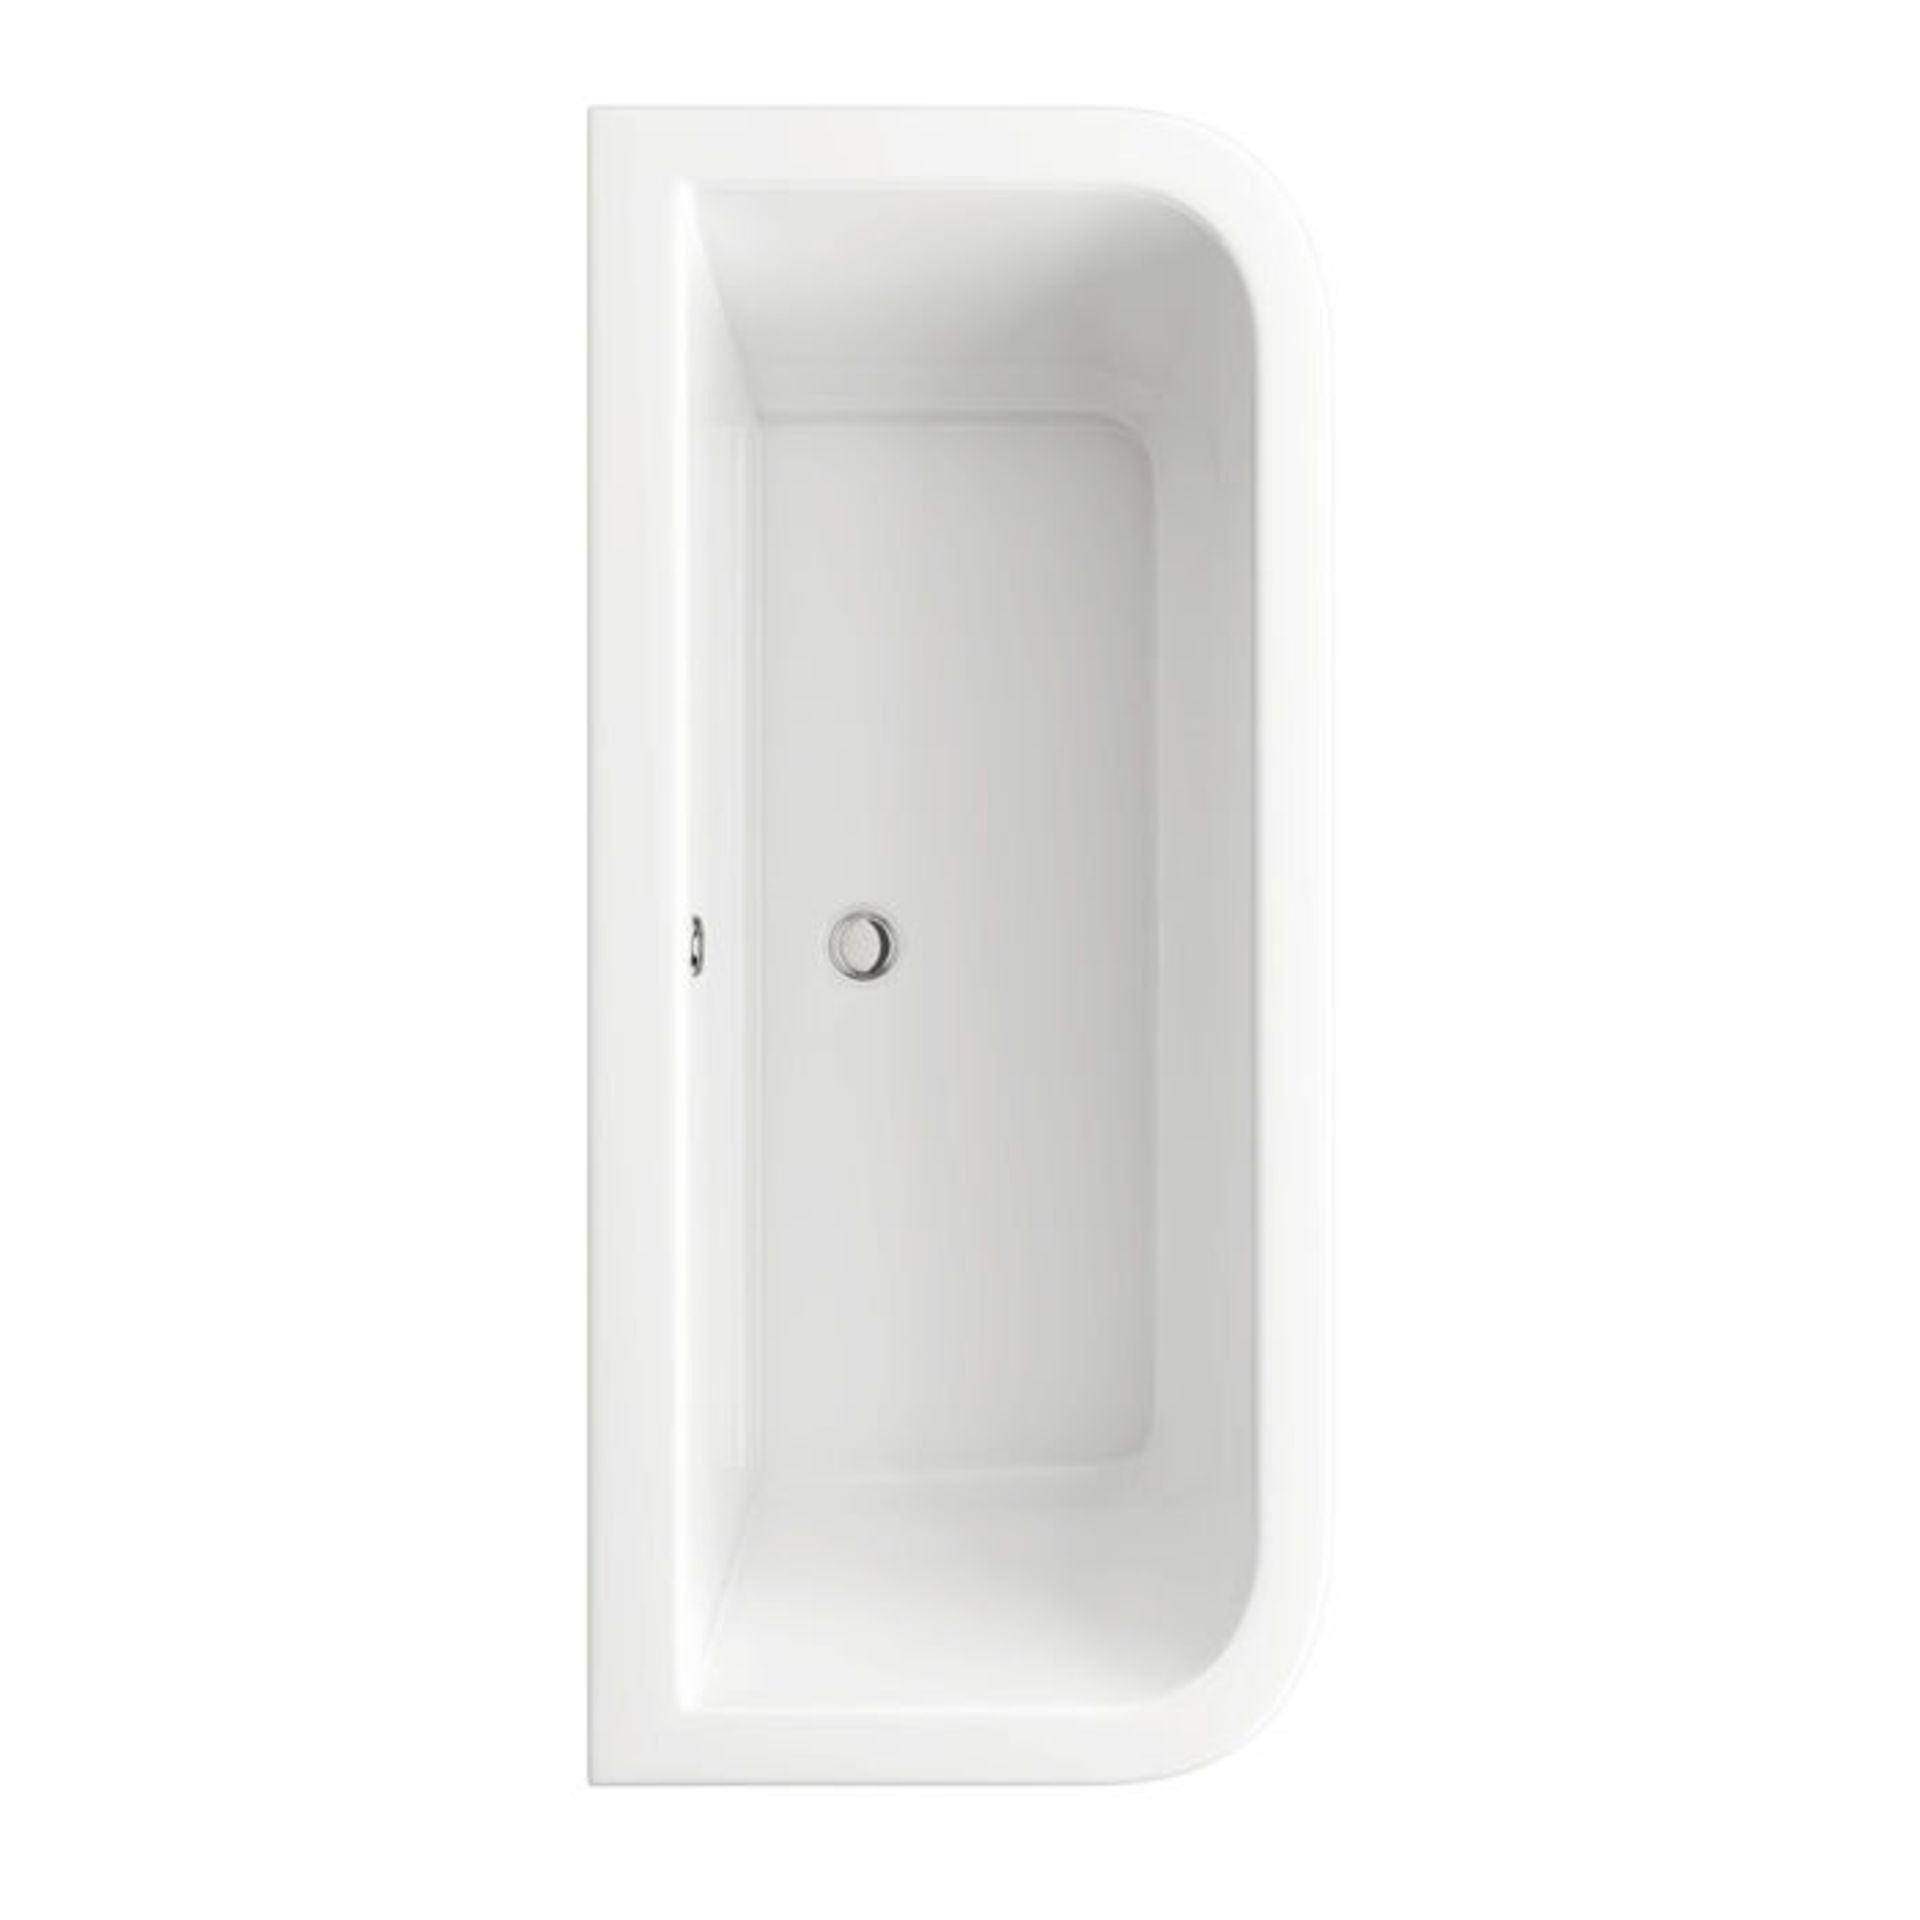 (PT79) 1700x750x460mm Denver Back to Wall Bath - Large. The double ended feature makes this bath - Image 4 of 4